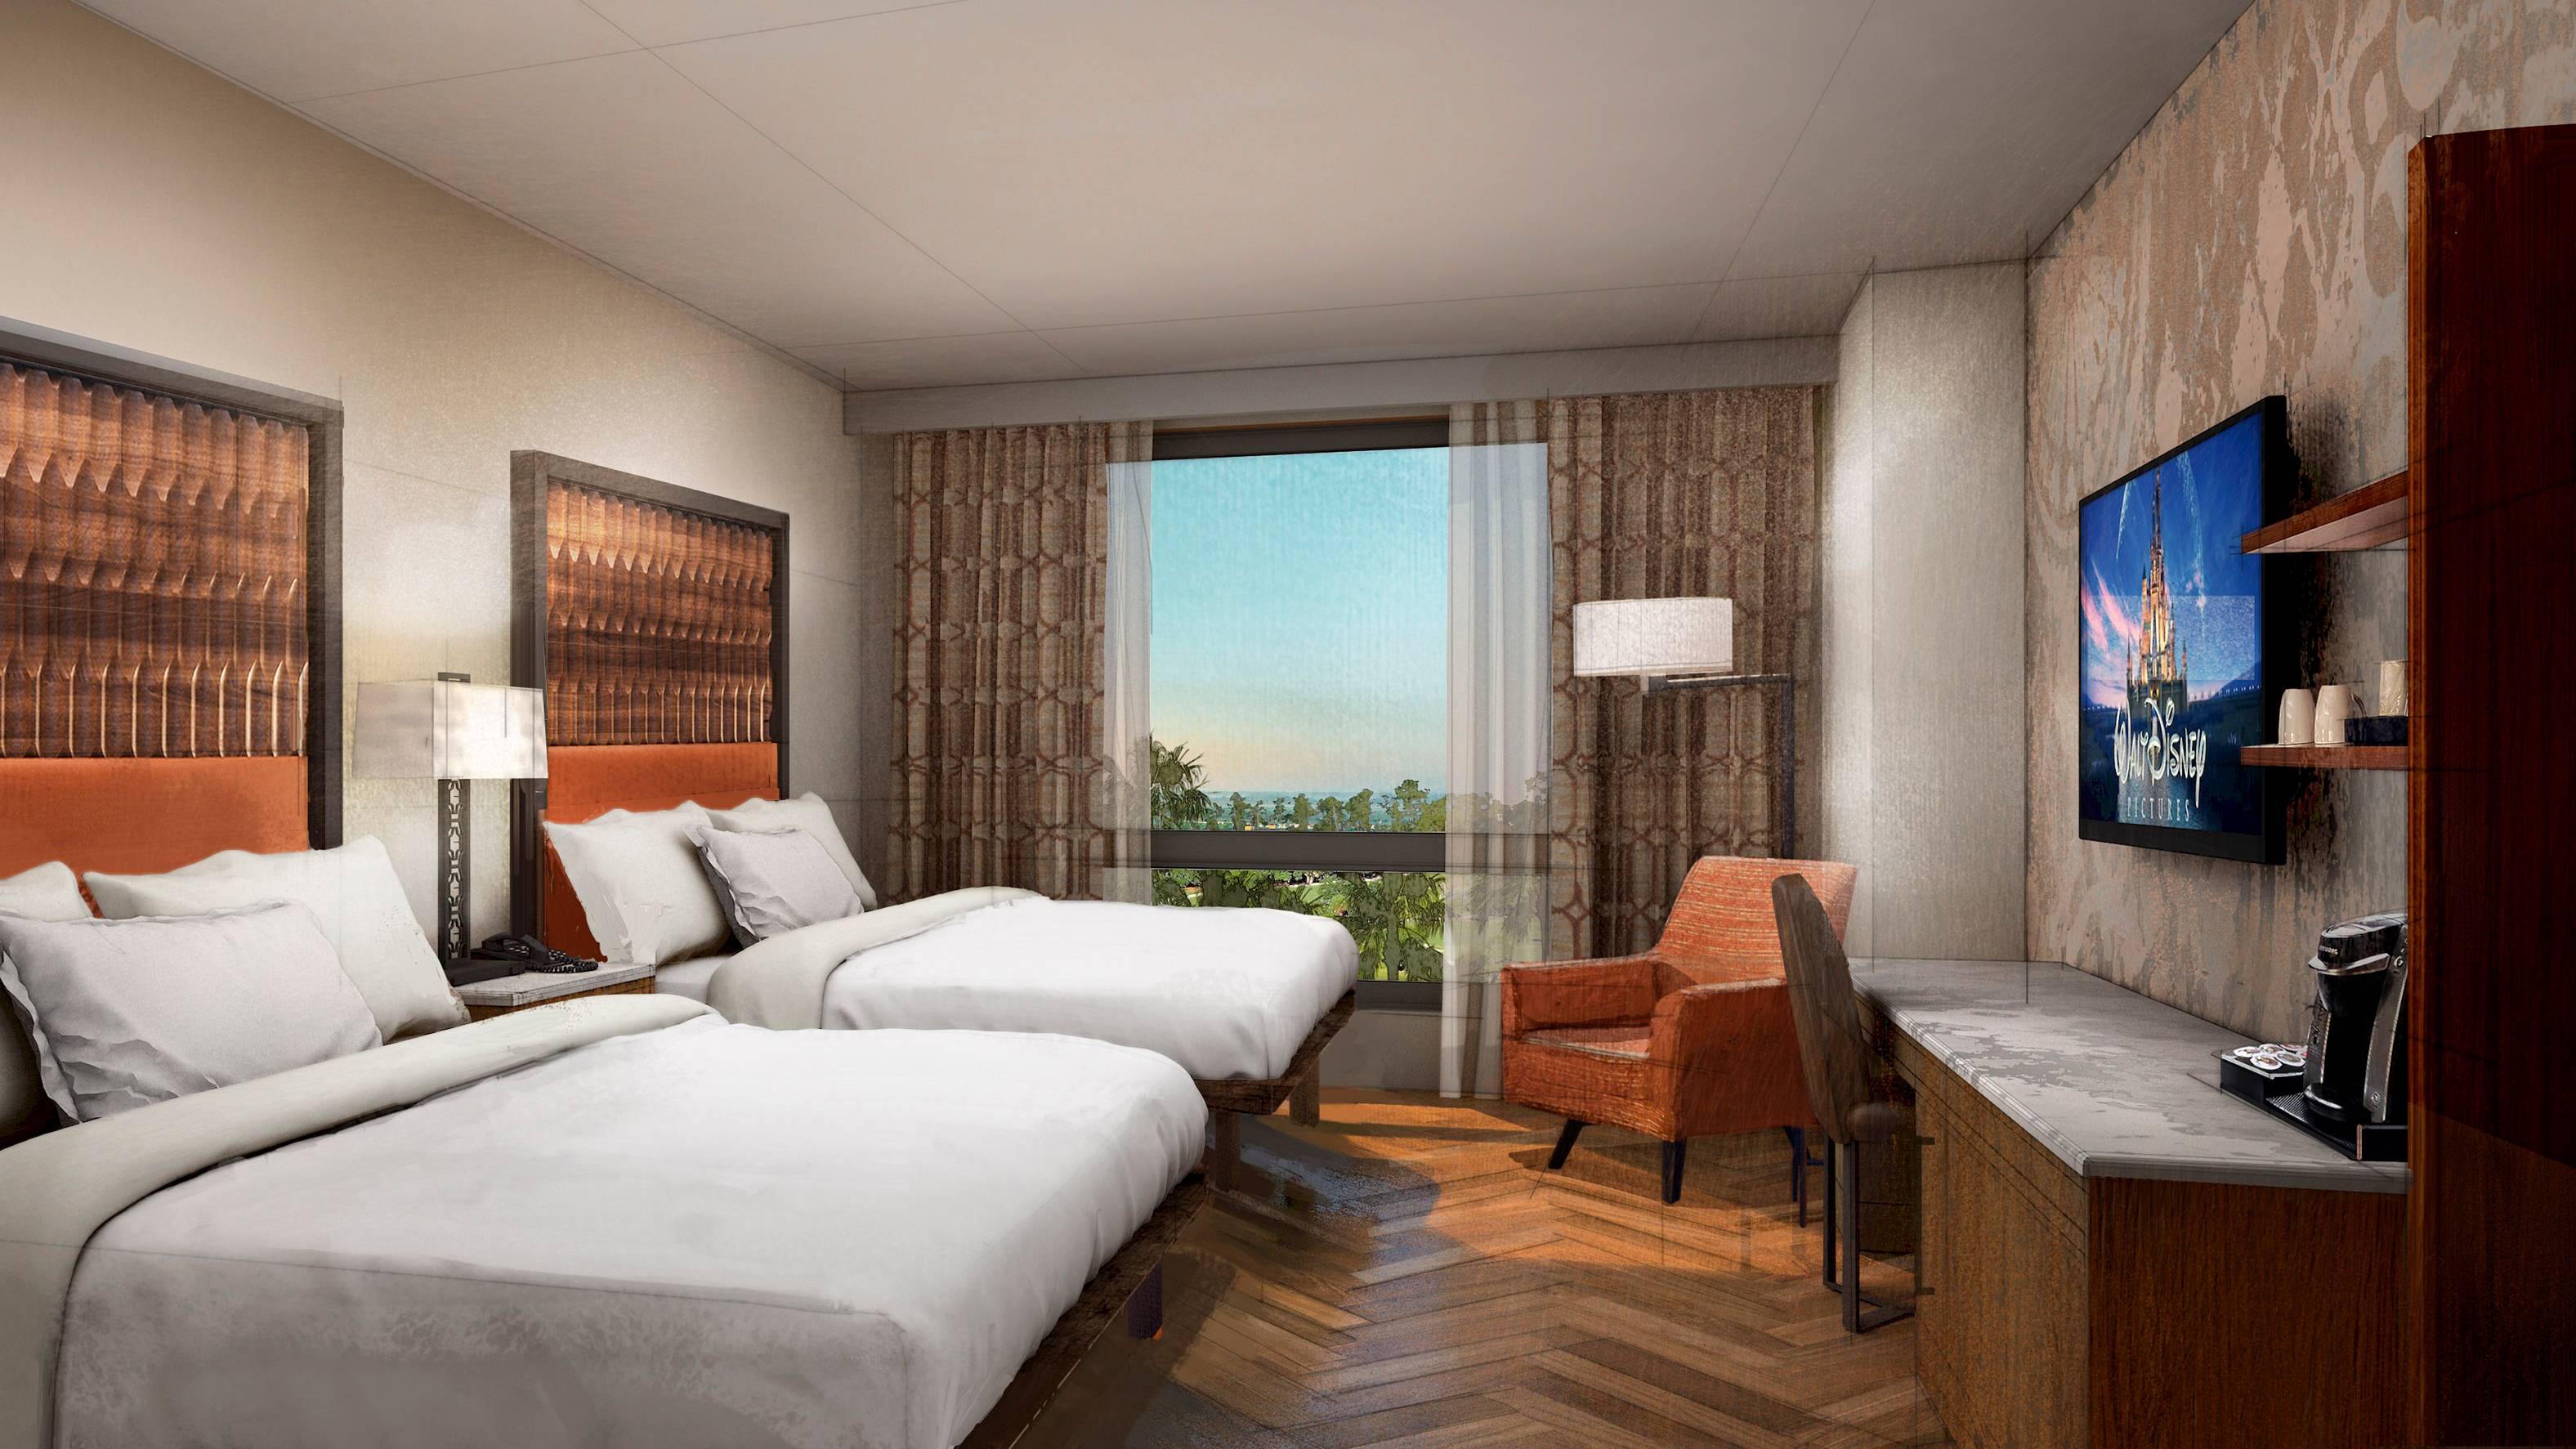 PHOTOS - Gran Destino Tower room and suite concept art, and reservations now open